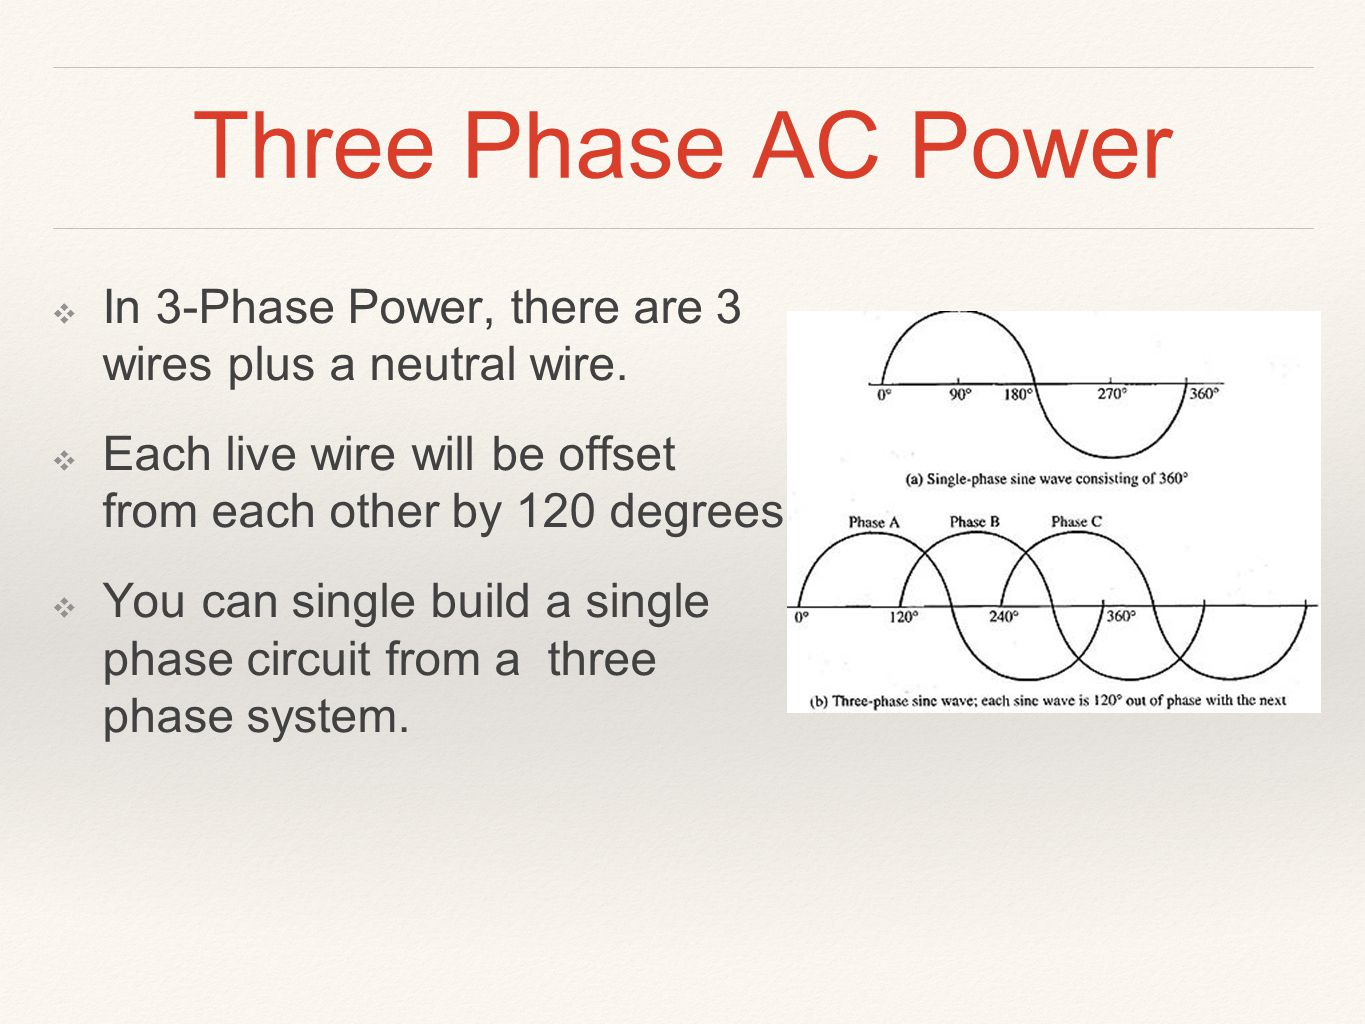 Three Phase AC Power ❖ In 3-Phase Power, there are 3 wires plus a neutral wire.